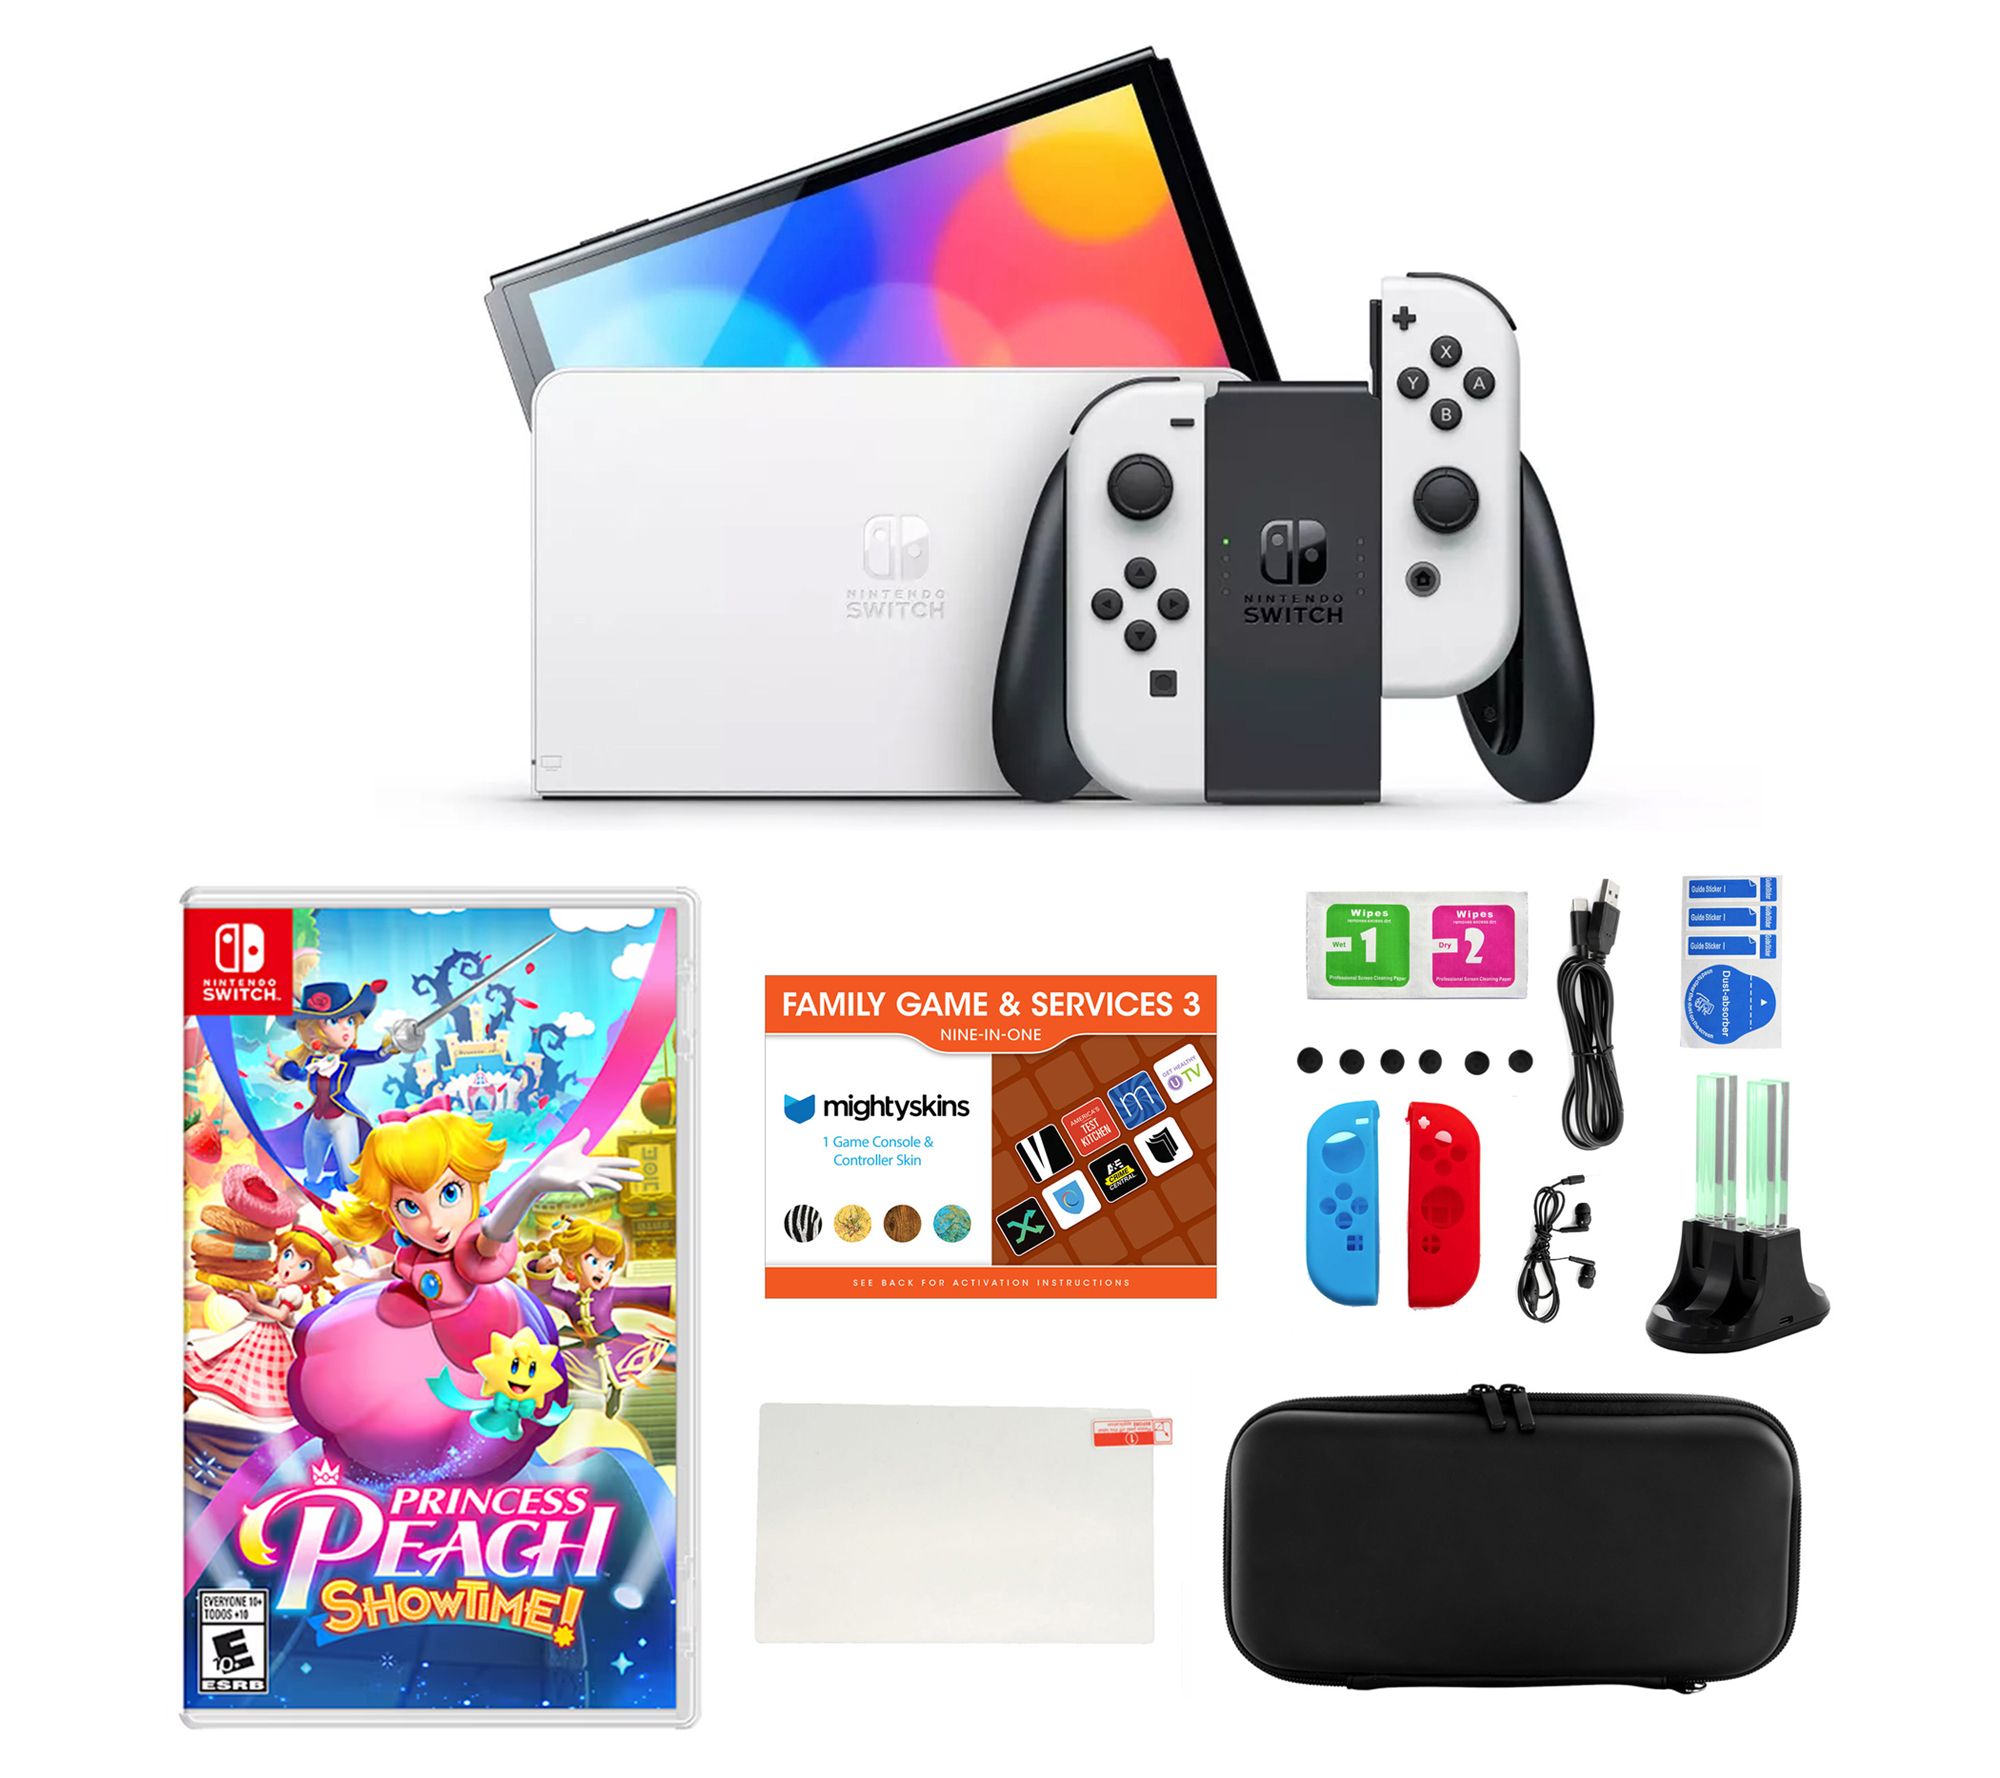 Nintendo Switch OLED White Console and PrincessPeach: Showtime